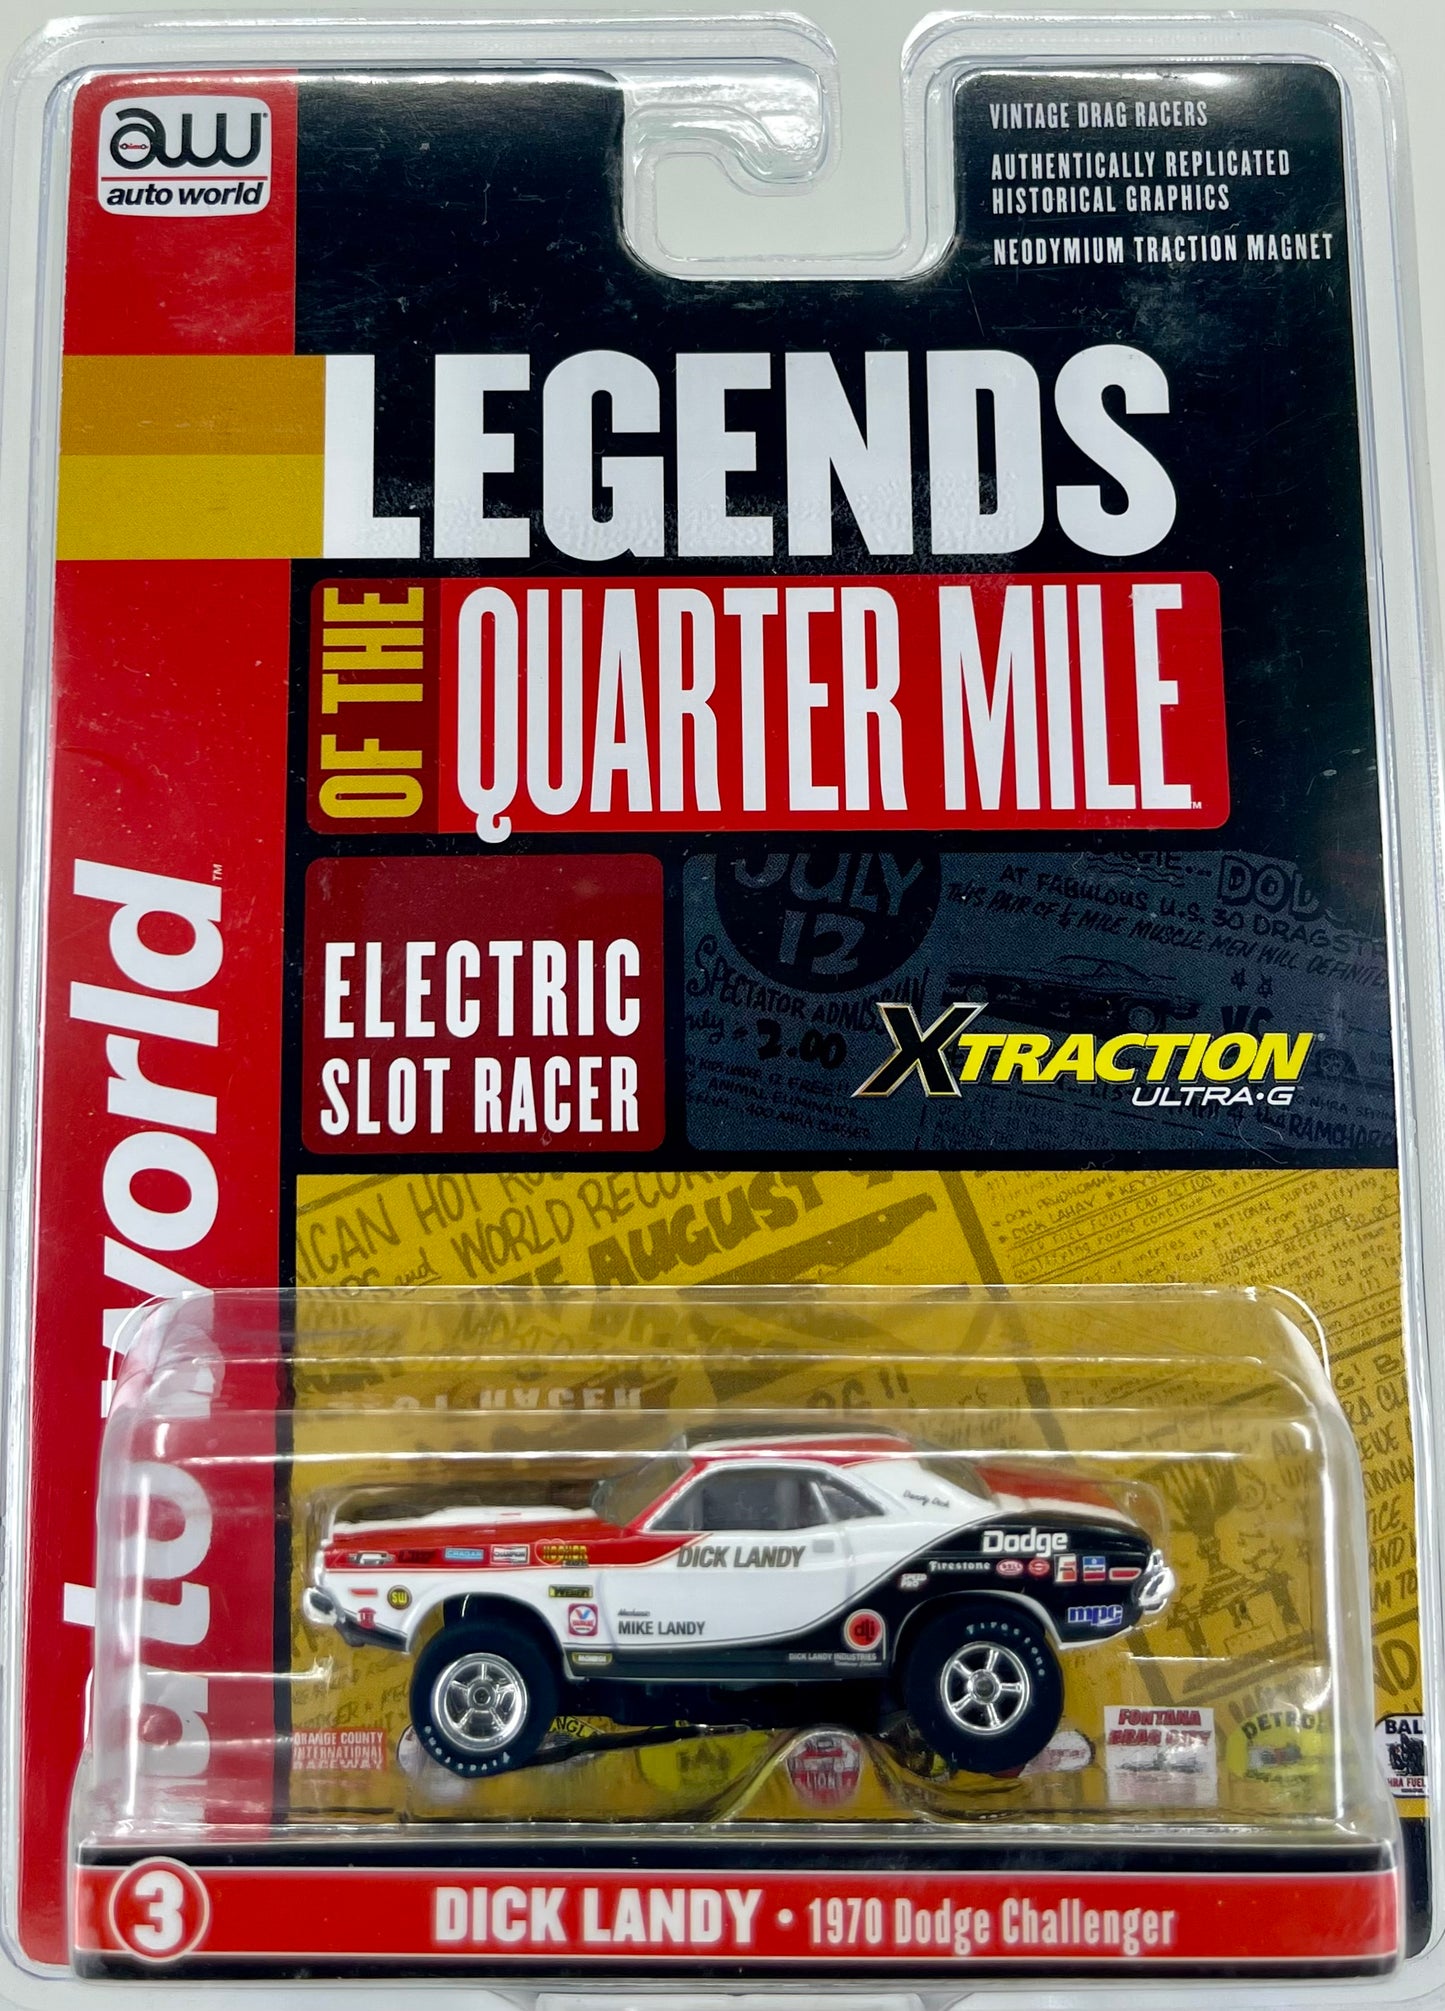 1970 Dodge Challenger Dick Landy Legends of the Quarter Mile, H.O. Scale Slot Car, Xtraction Chassis